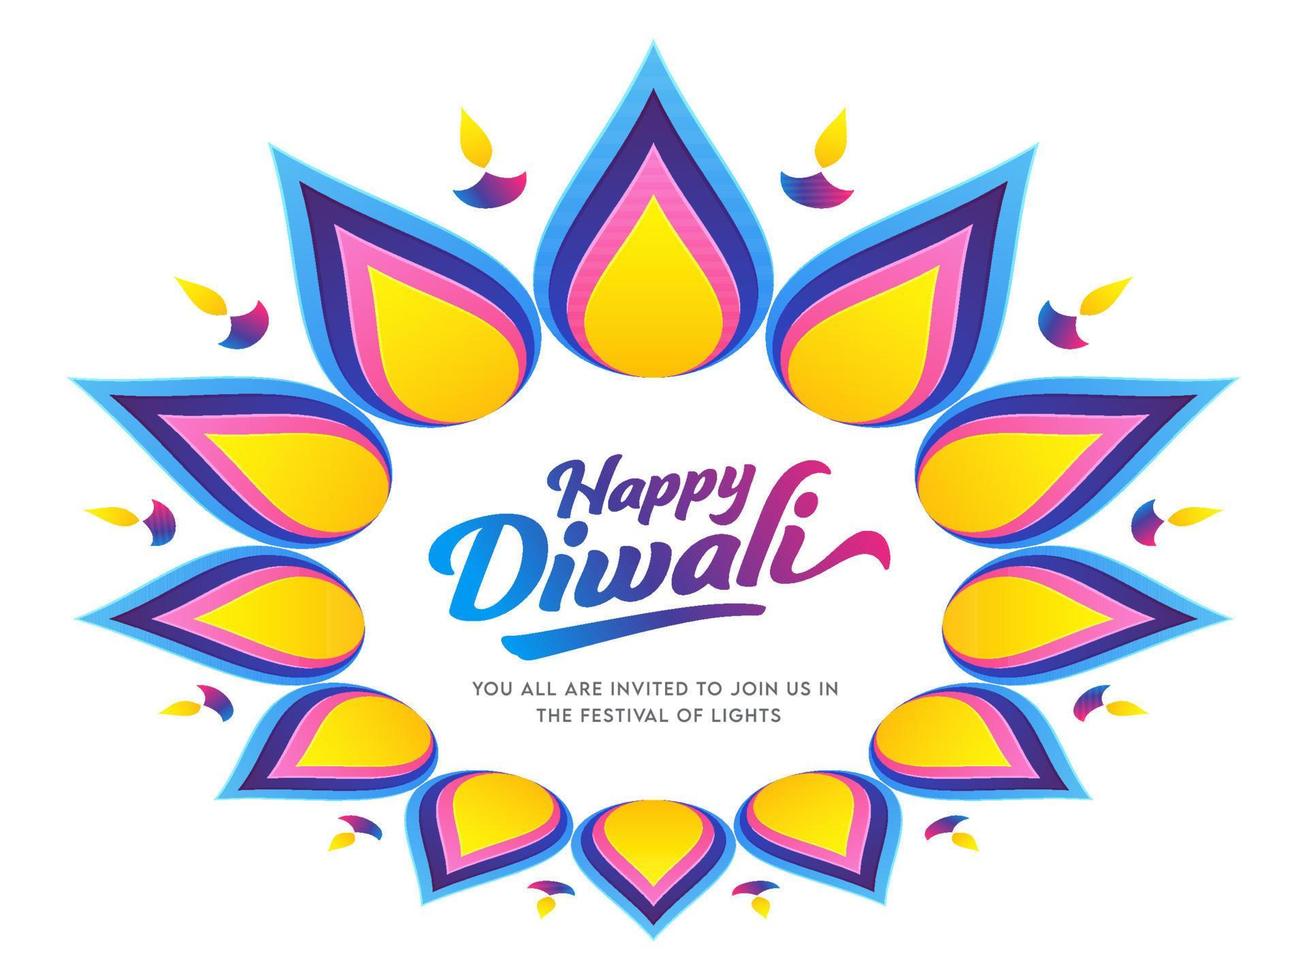 Happy Diwali Font on Rangoli Or Floral Pattern Decorated with Lit Oil Lamps. vector